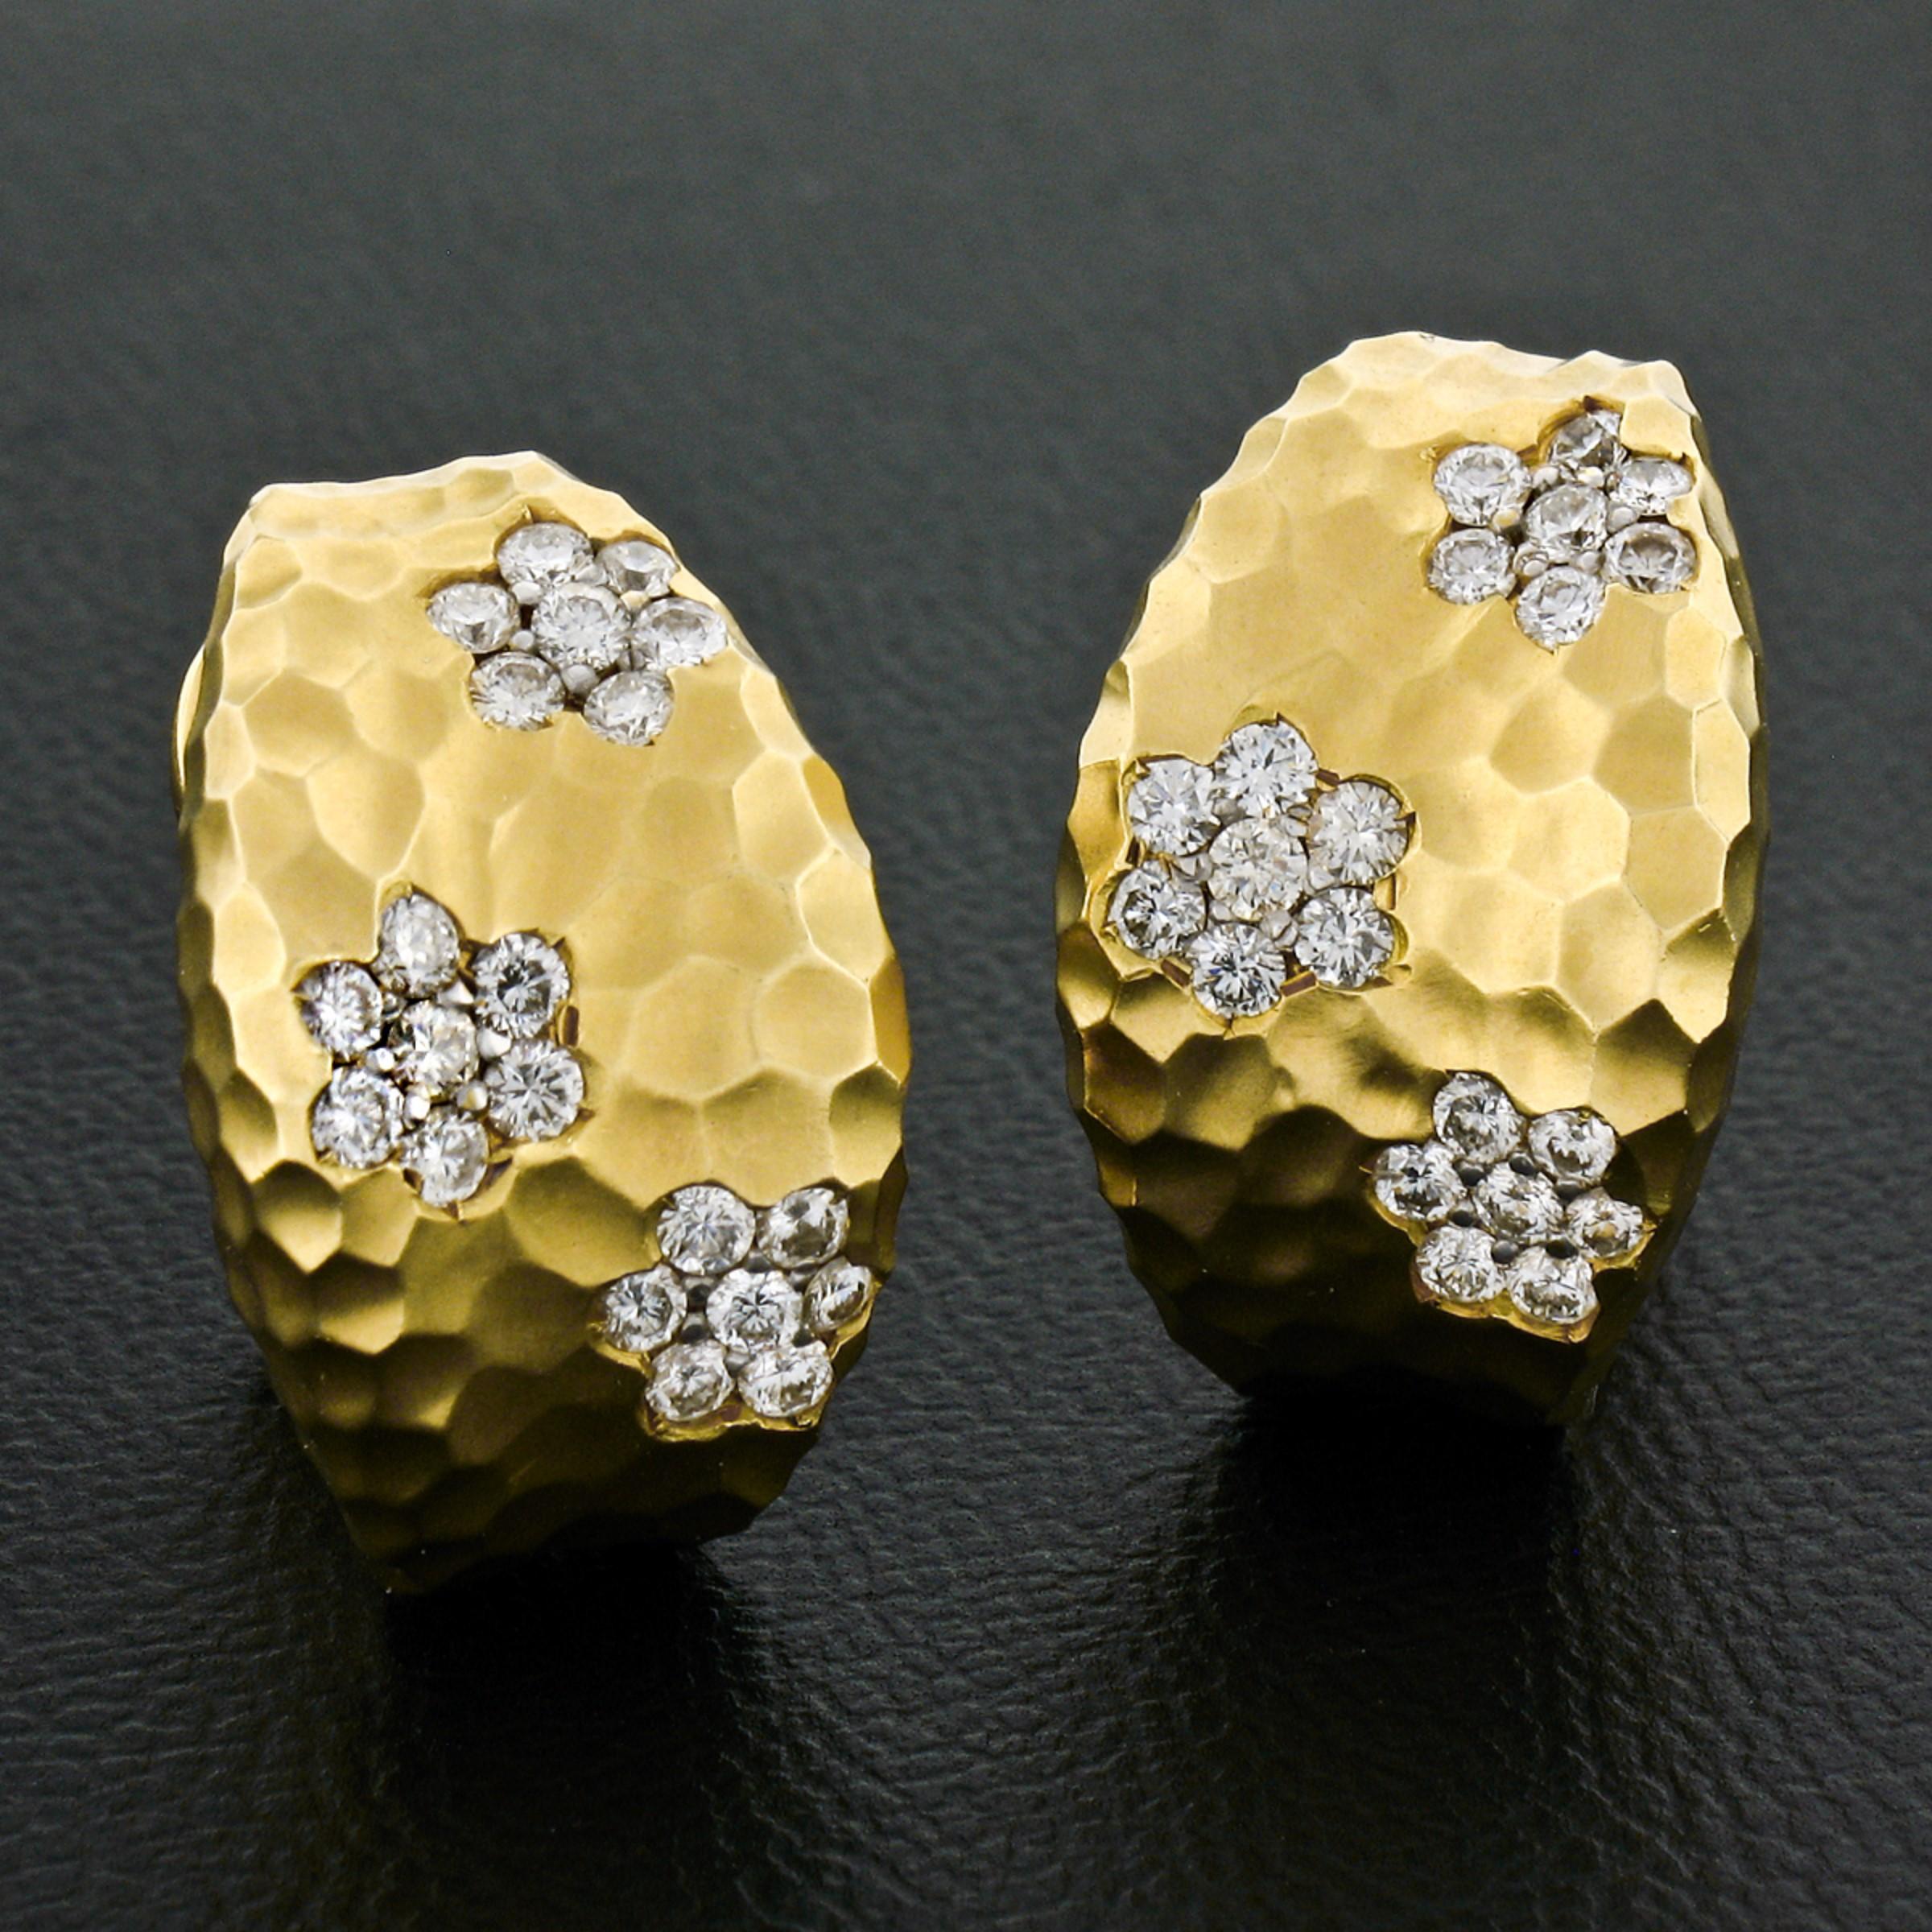 Here we have a gorgeous pair of huggie earrings designed by Roberto Coin and crafted in Italy from solid 18k yellow gold. The earrings have a very lovely and unique hammered textured over the desirable matte finishing. Each earring is decorated with